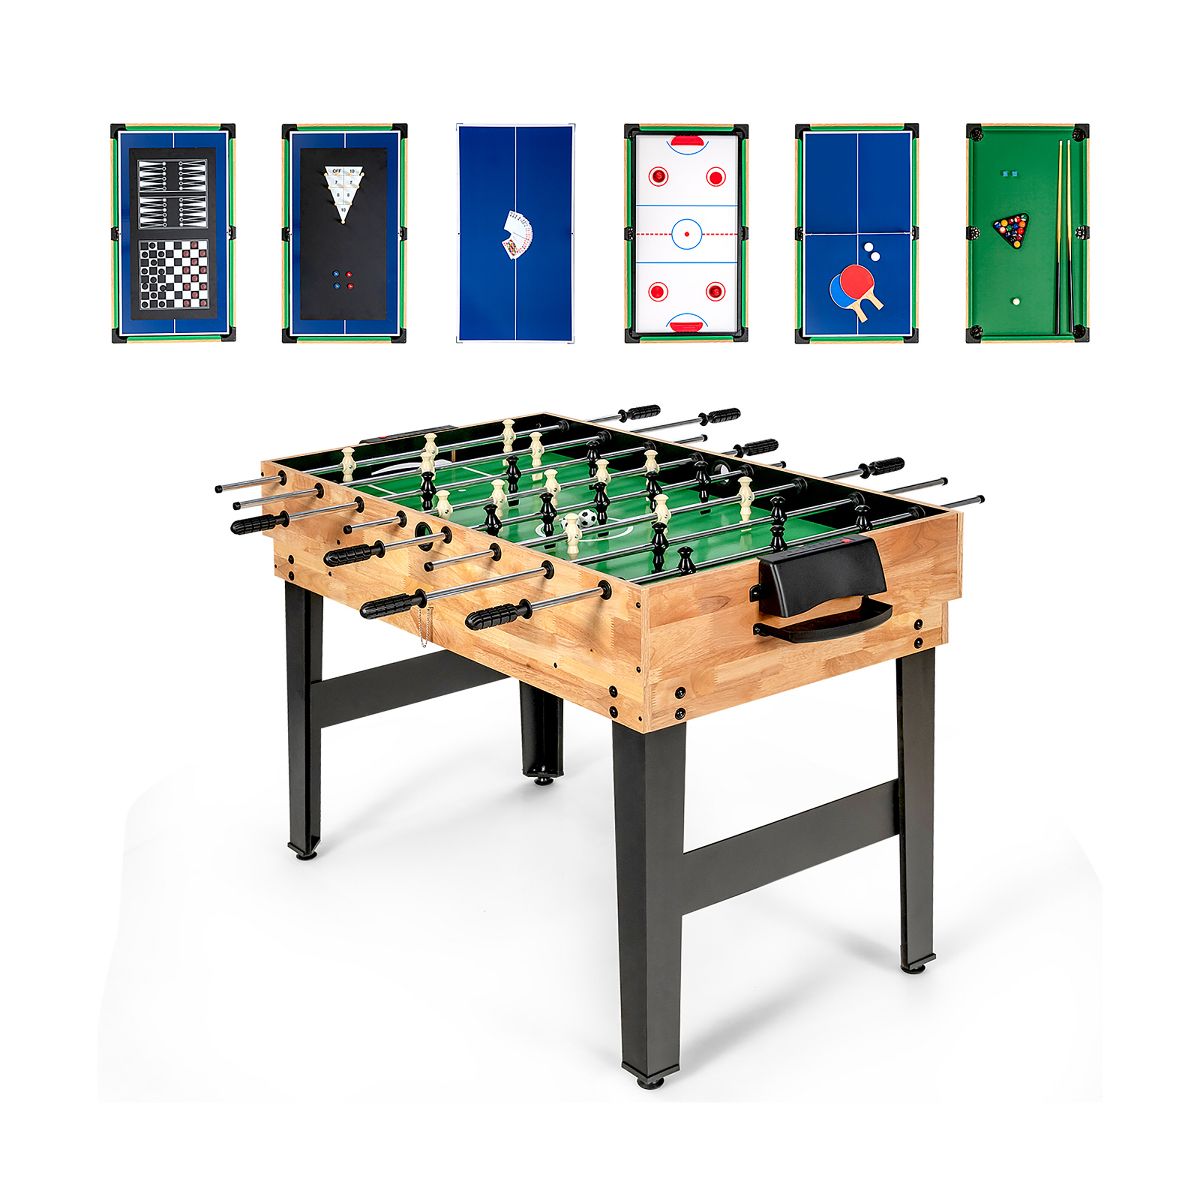 Costway 10-in-1 Combo Game Table Set, Multi Game Table for Home, Game Room